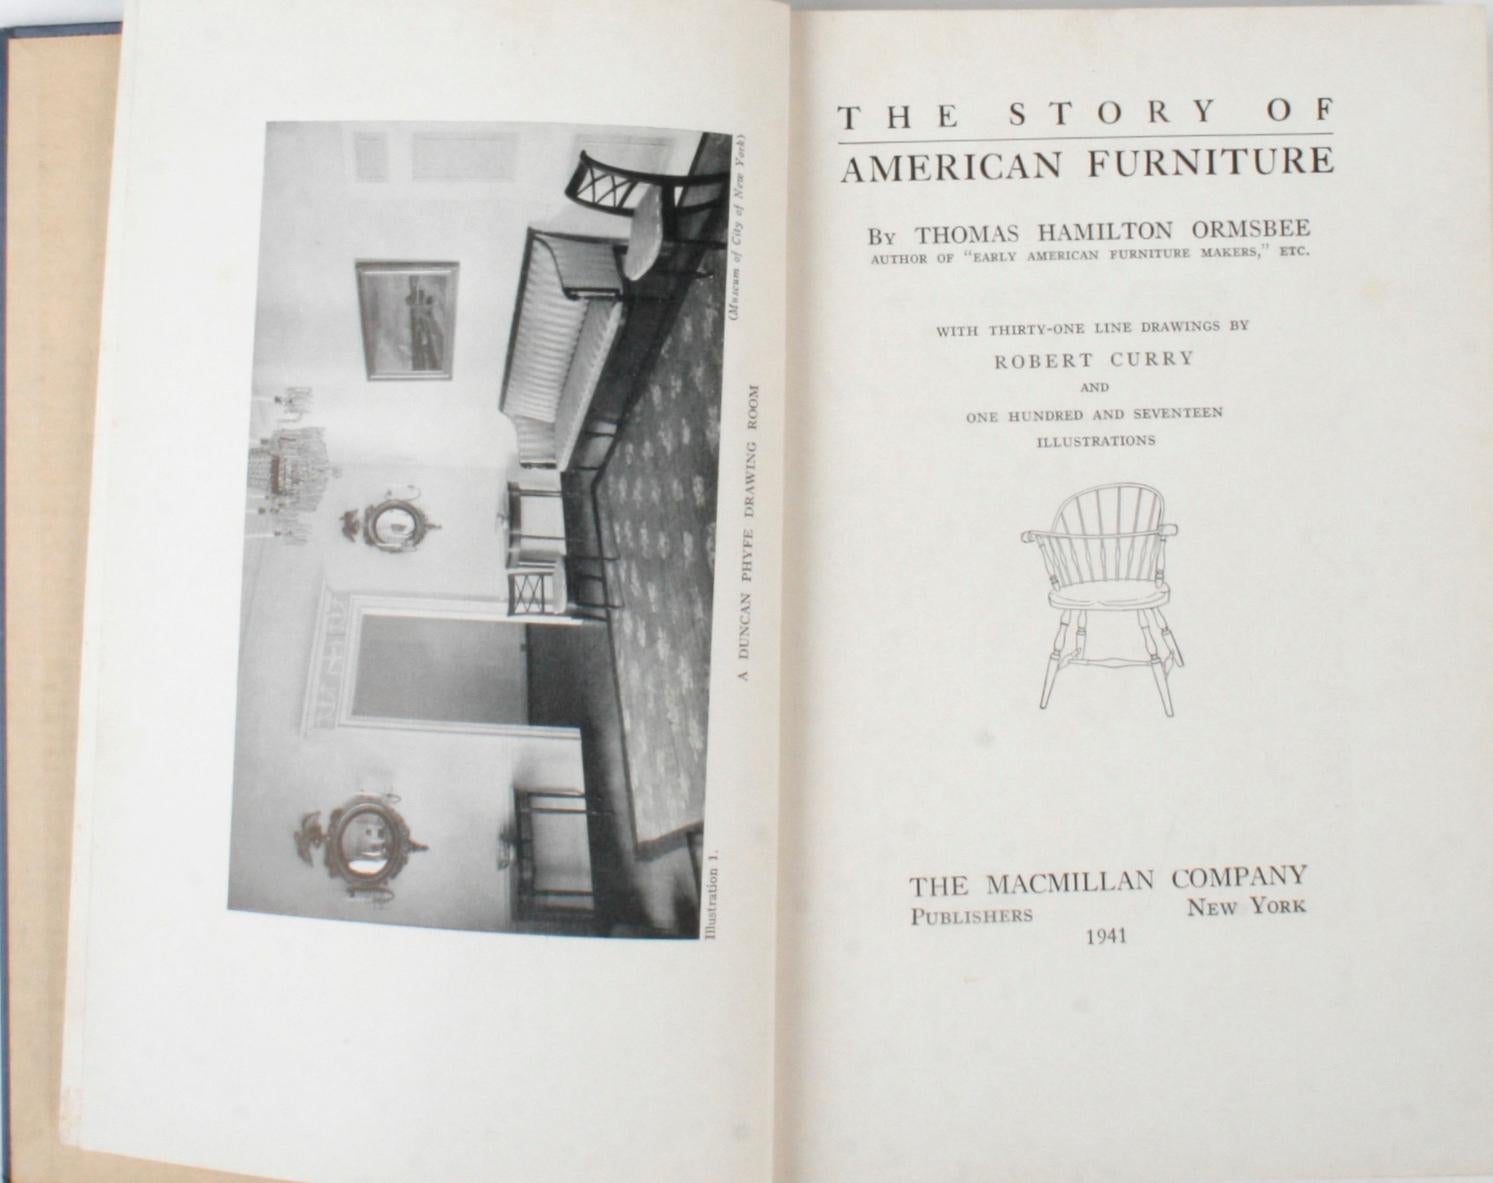 The story of American Furniture by Thomas Hamilton Ormsbee. New York: The Macmillion Company, 1941. Hardcover with no dust jacket. A comprehensive resource book on America antique furniture with 31 line drawings and 117 black and white photographs.